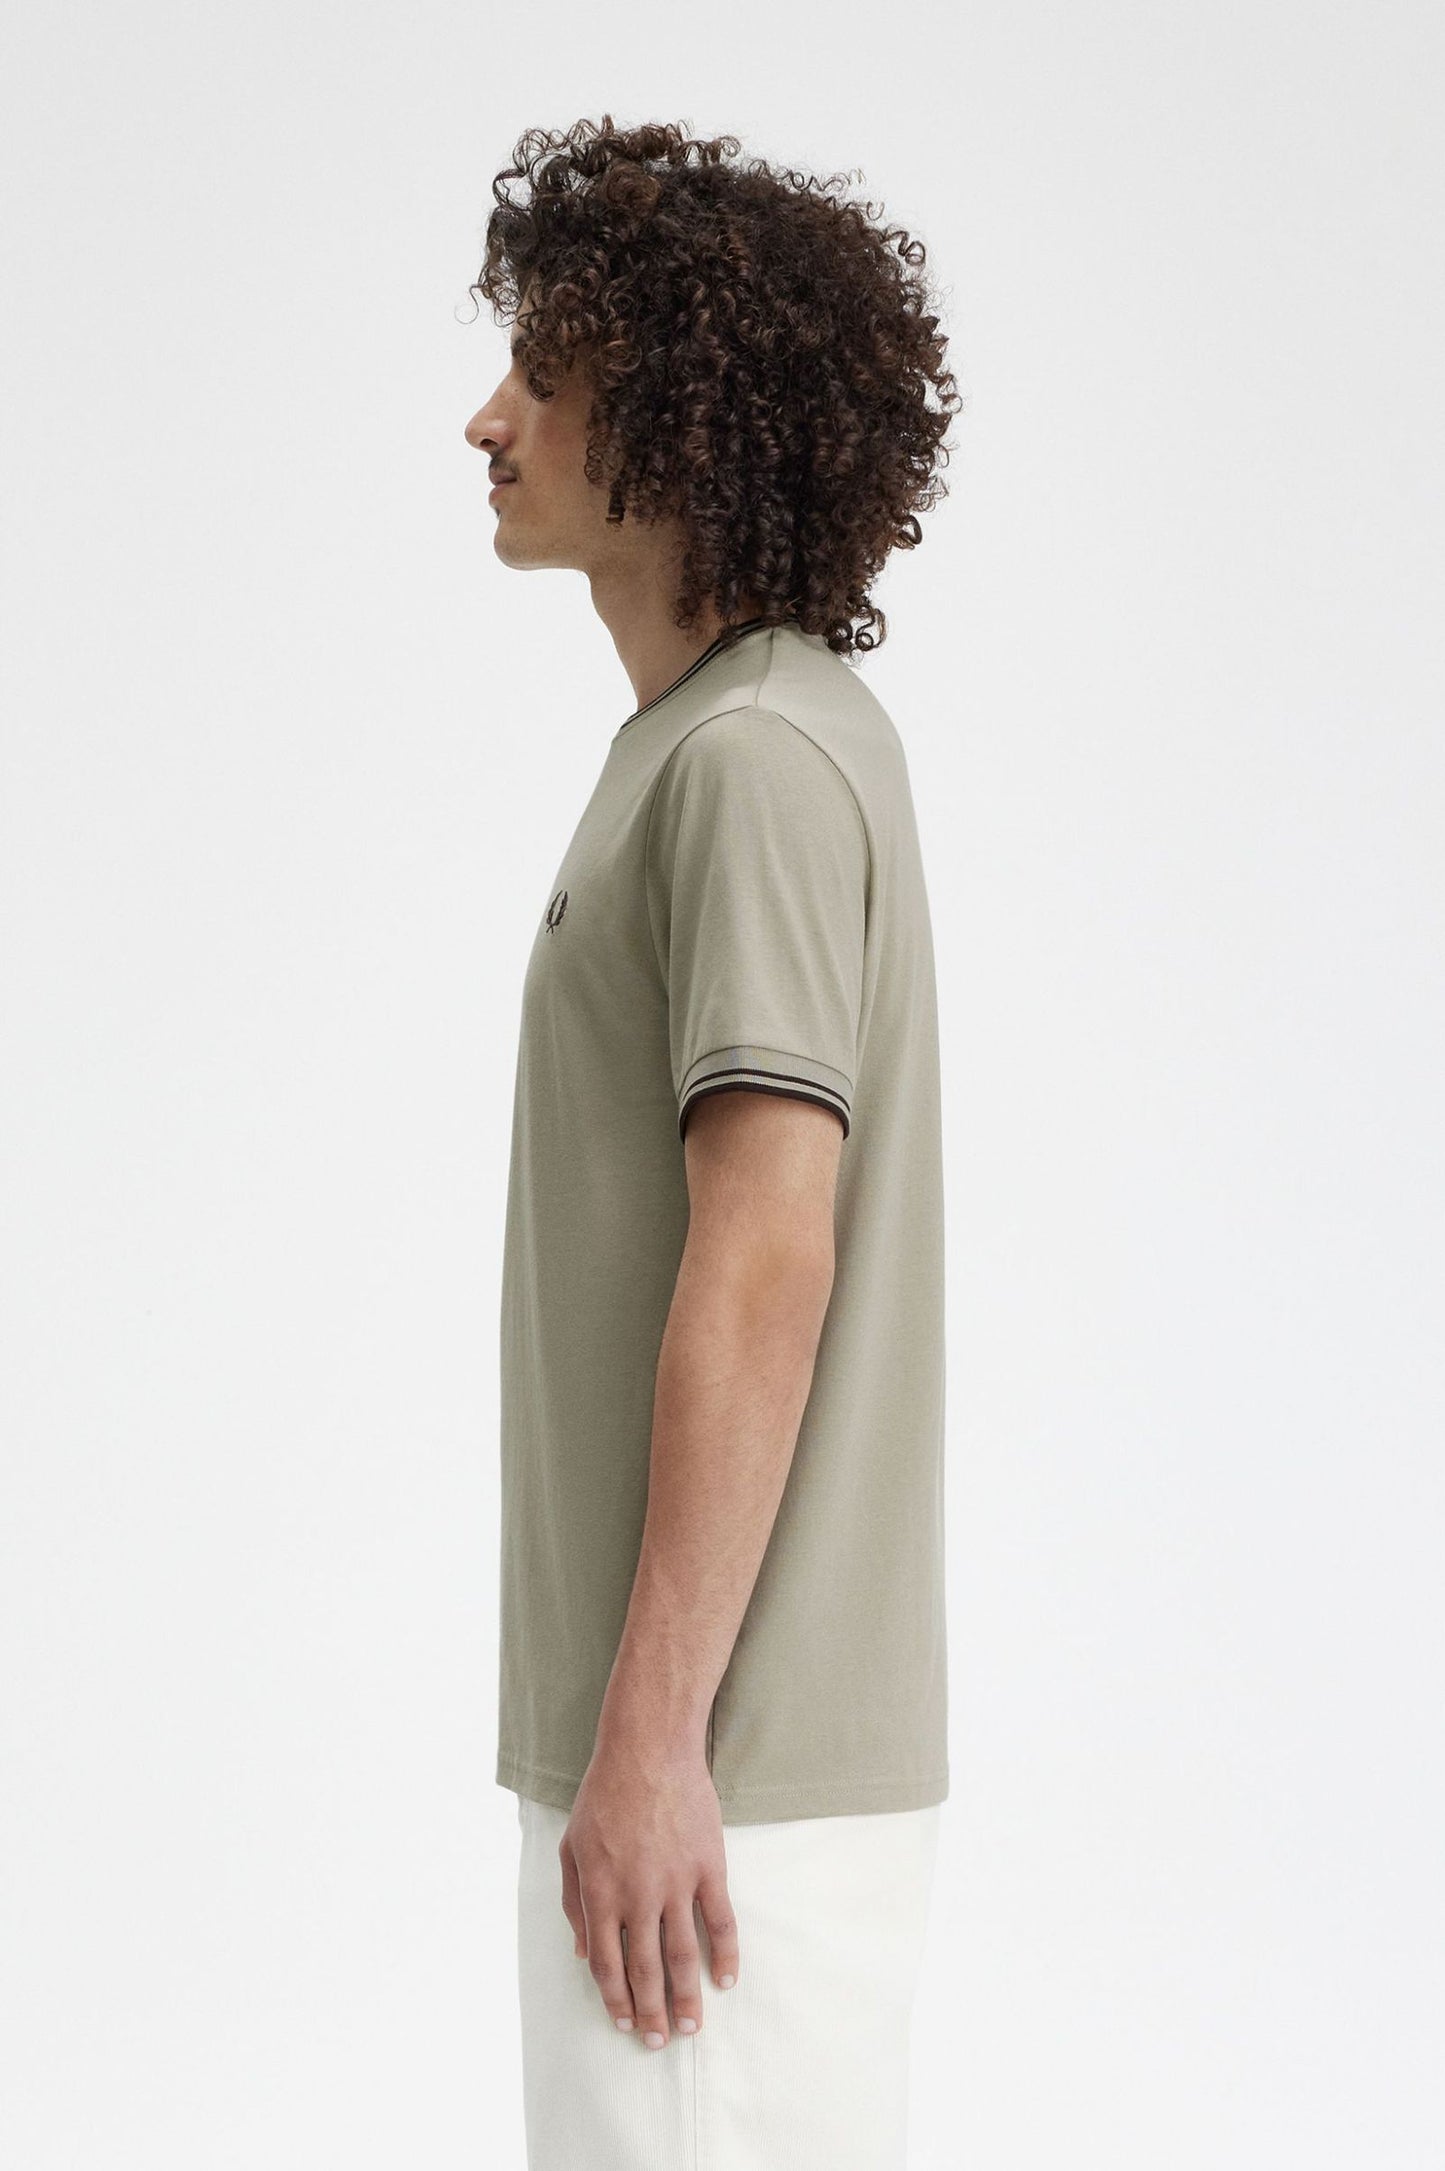 m tops - FRED PERRY - Twin Tipped T-Shirt - PLENTY